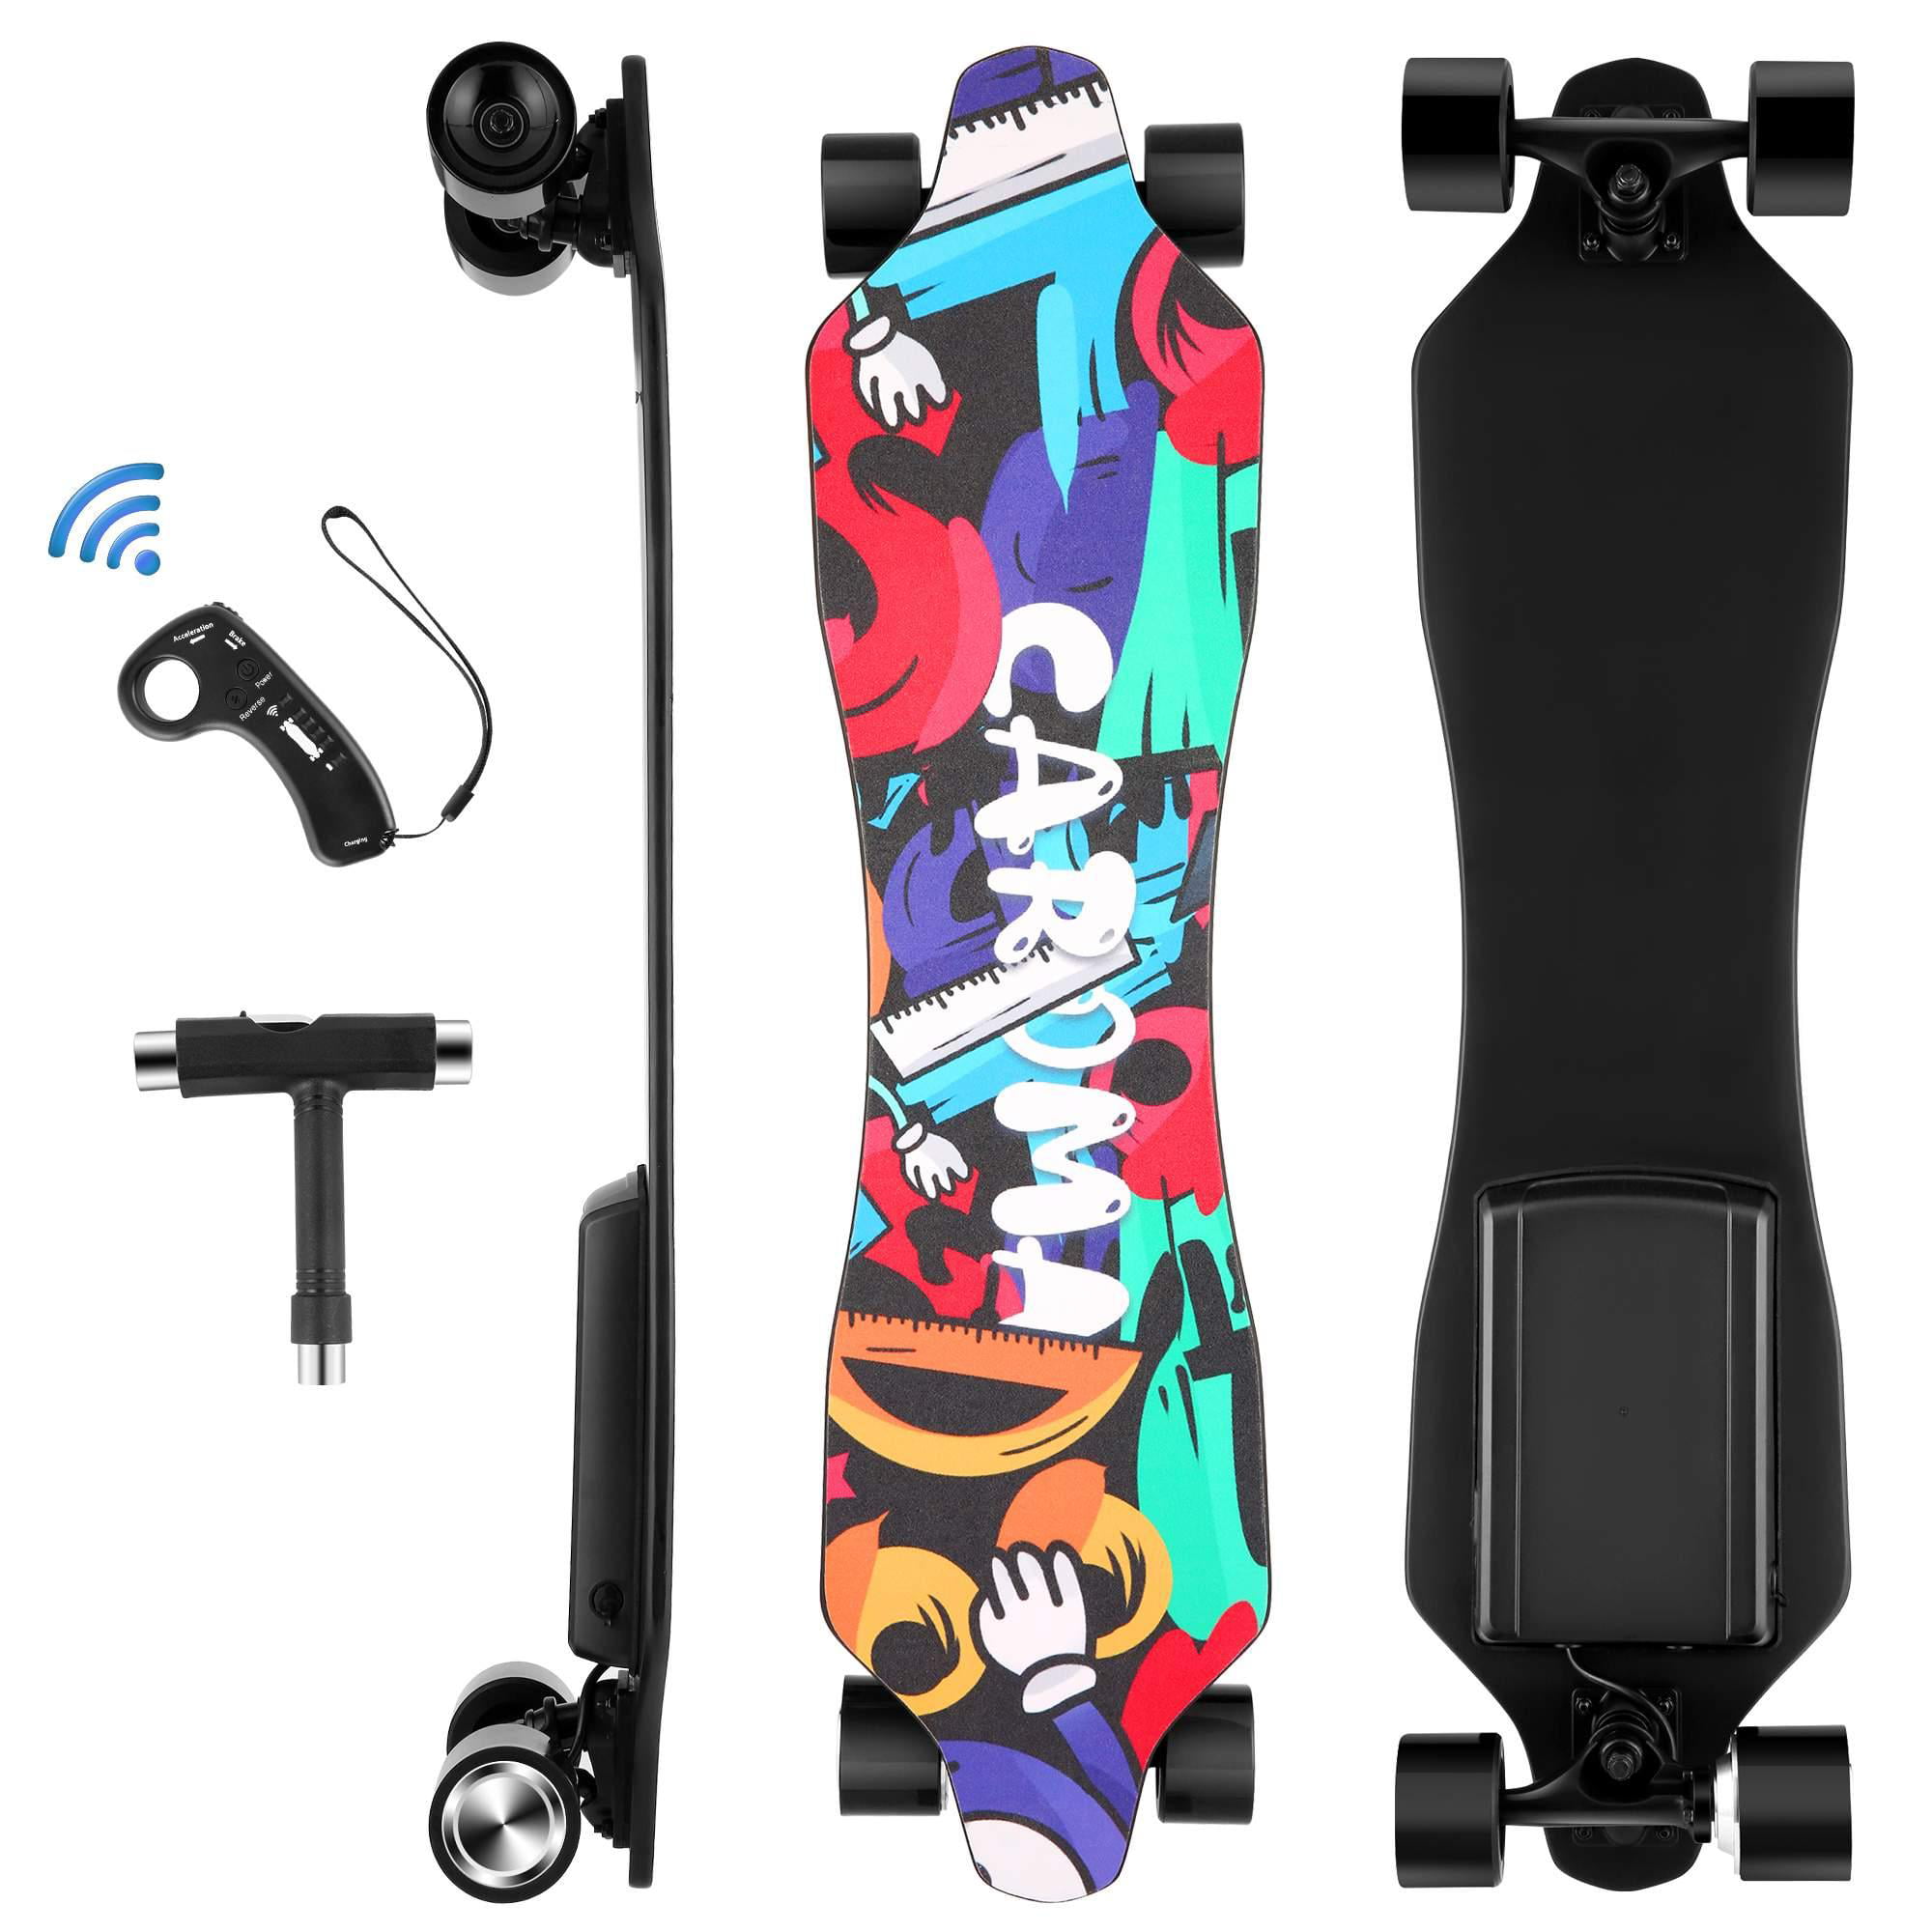 Details about   CAROMA Electric Skateboard Cruiser Pro CA Maple Long Board with Remote CTRL 01 